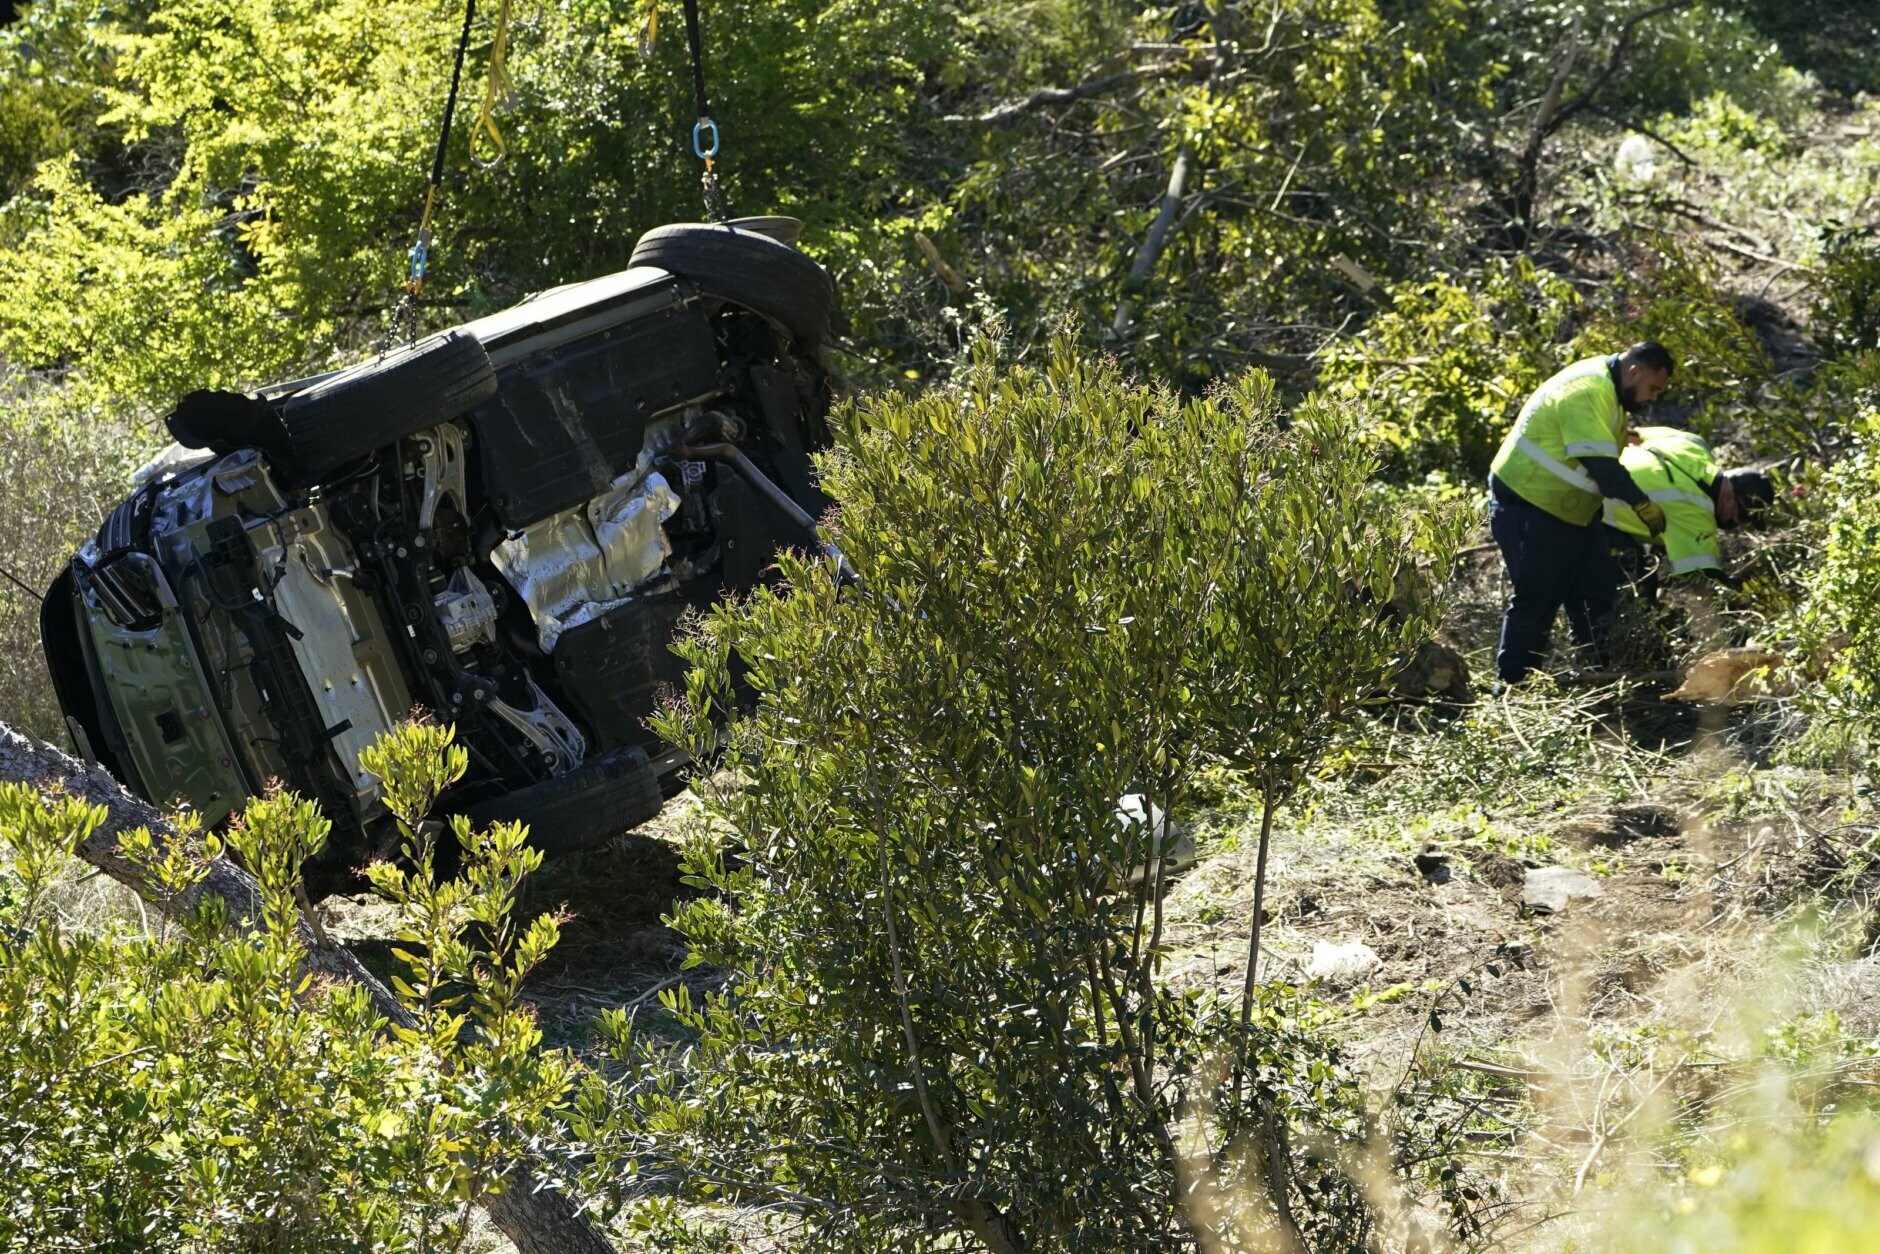 Workers remove debris near a vehicle on its side after a rollover accident involving golfer Tiger Woods Tuesday, Feb. 23, 2021, in Rancho Palos Verdes, Calif., a suburb of Los Angeles. Woods suffered leg injuries in the one-car accident and was undergoing surgery, authorities and his manager said. (AP Photo/Marcio Jose Sanchez)